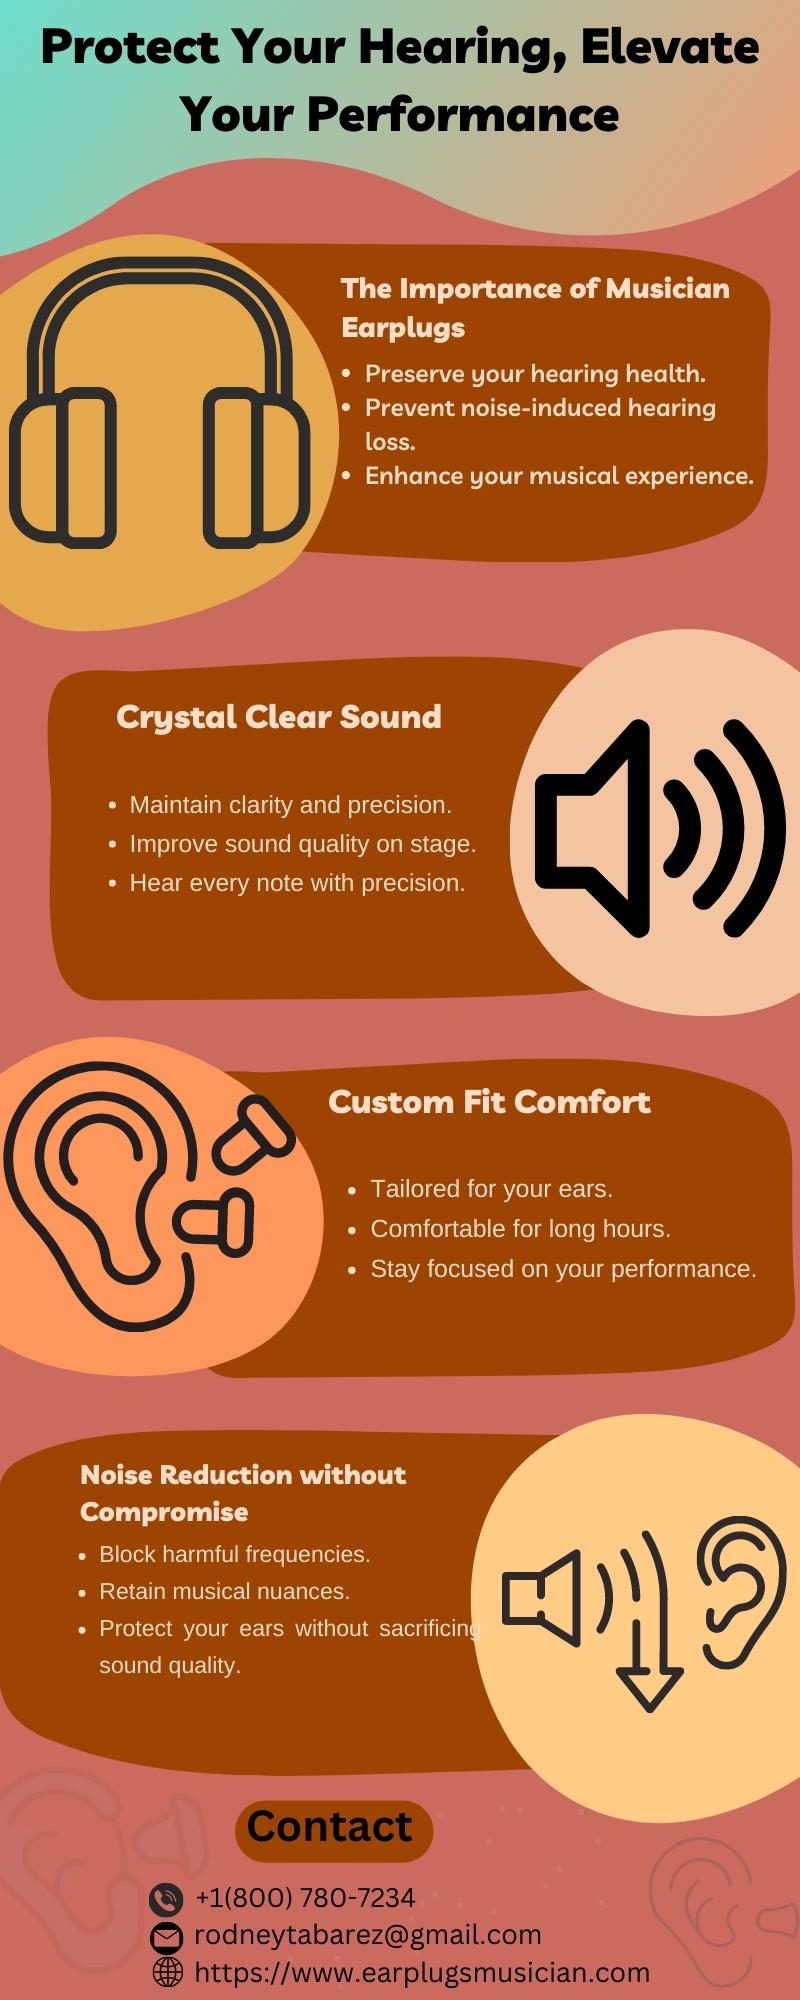 Protect Your Hearing, Elevate Your Performance